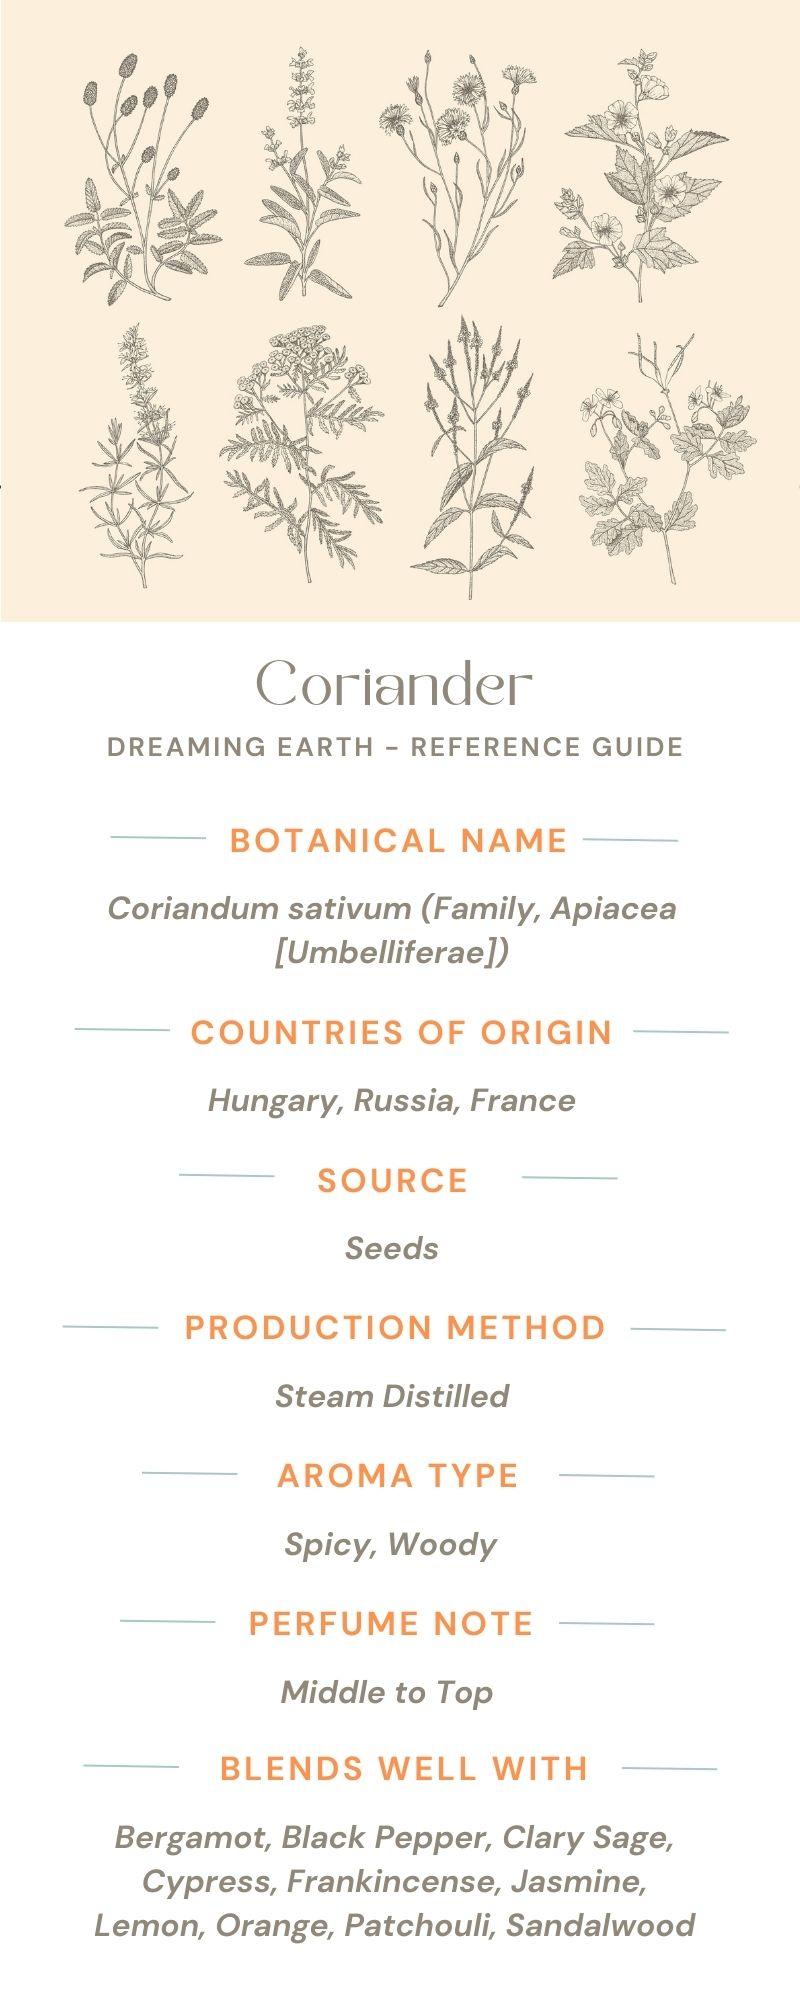 Load image into Gallery viewer, Coriander Essential Oil - Dreaming Earth Inc
